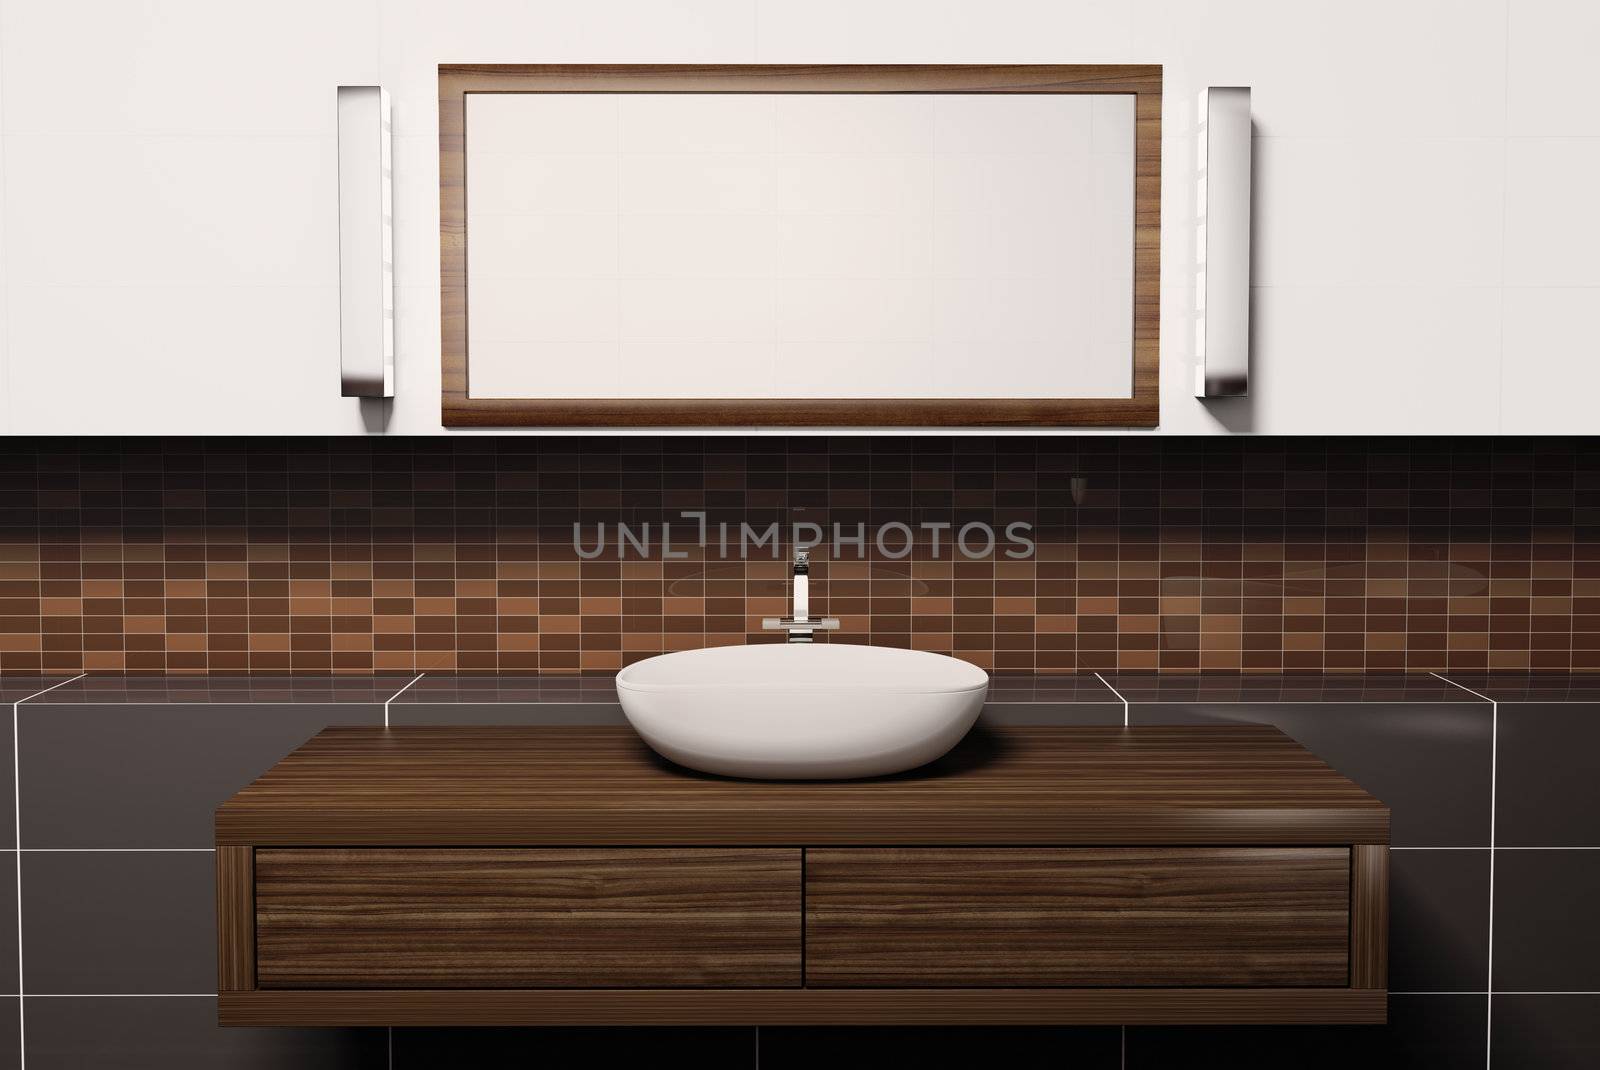 Washbasin mirror and lamps 3d render